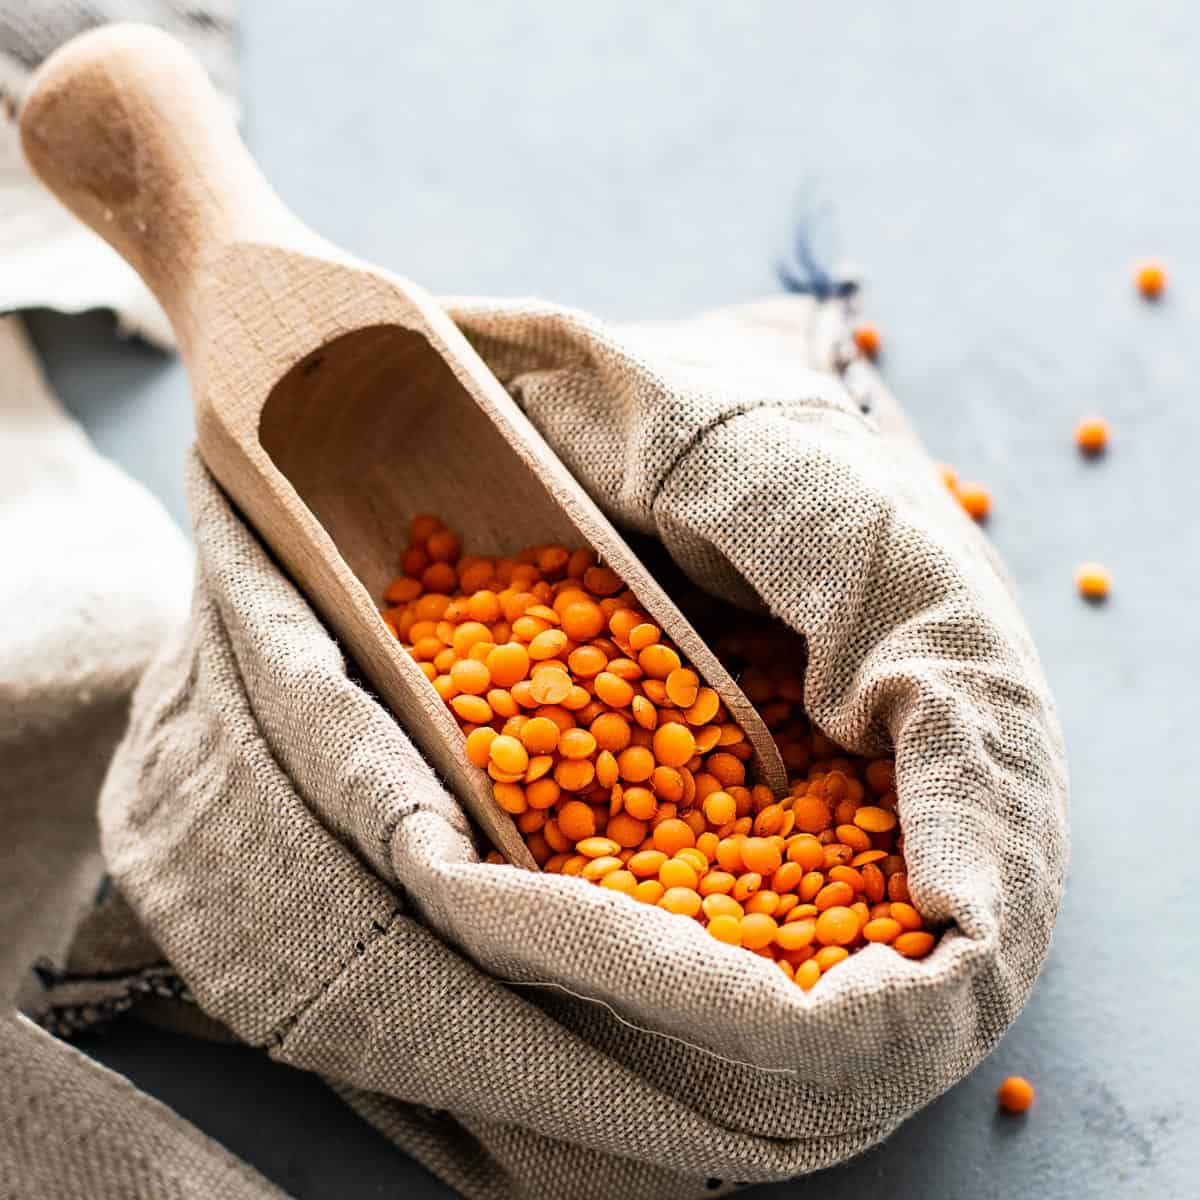 A sack full of uncooked red lentils.